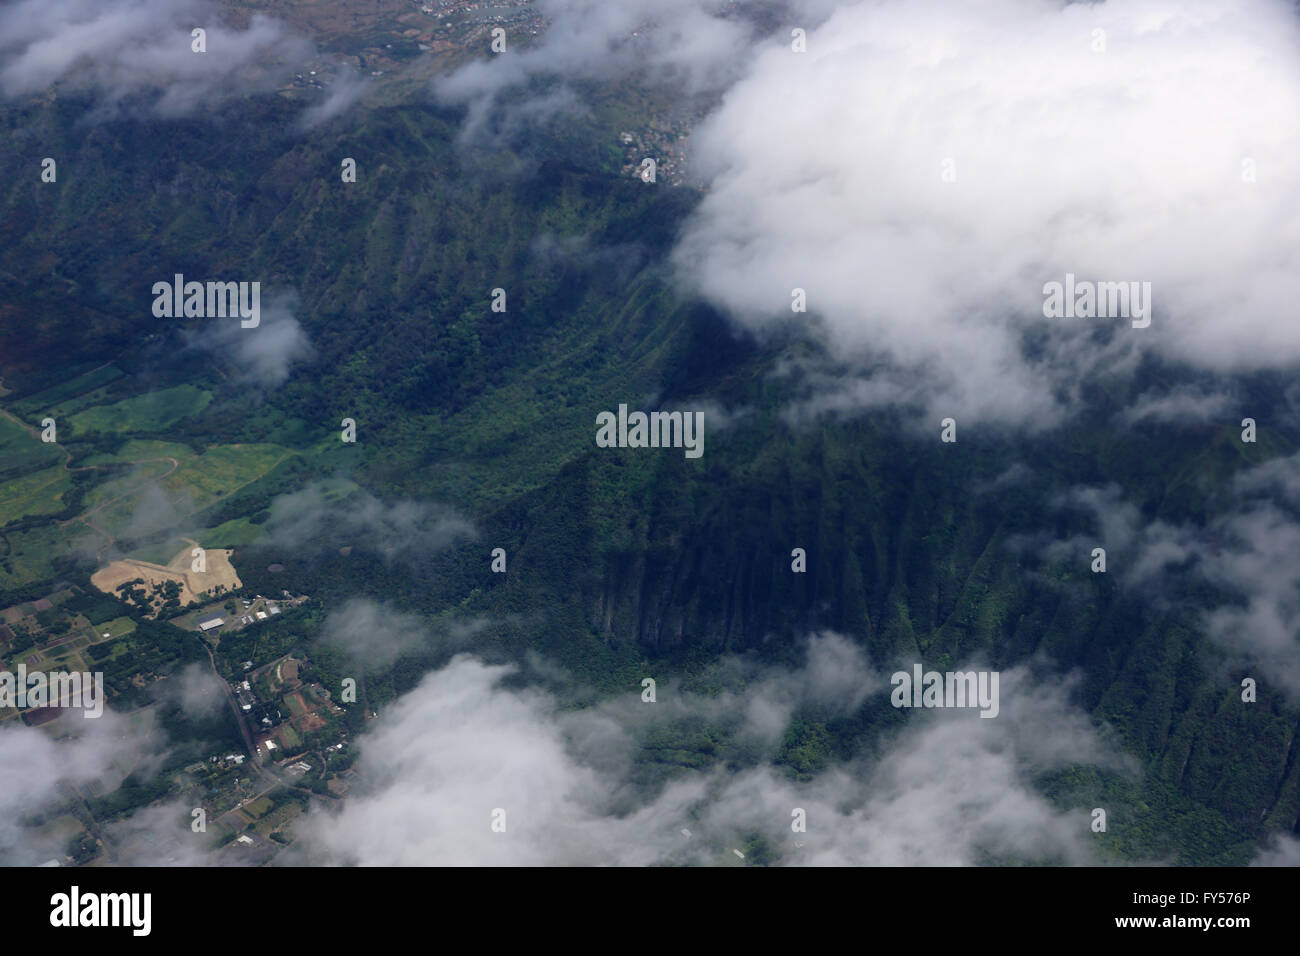 Aerial view of clouds over Waimanalo Farm lands, koolau mountains, and ridge communities of Honolulu on the island of Oahu in th Stock Photo